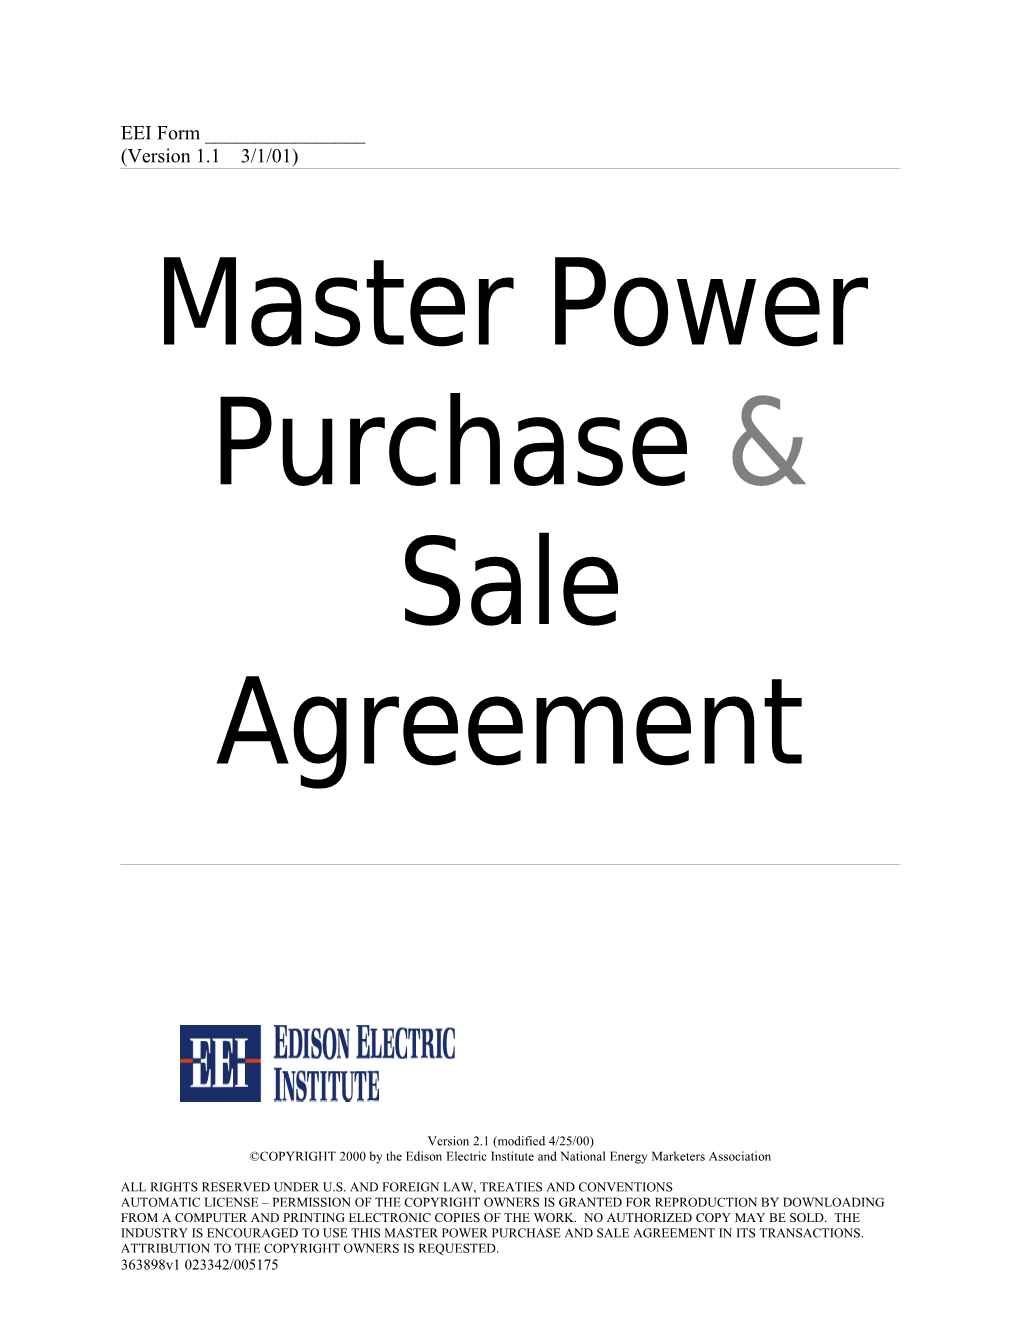 Master Power Purchase Sale Agreement